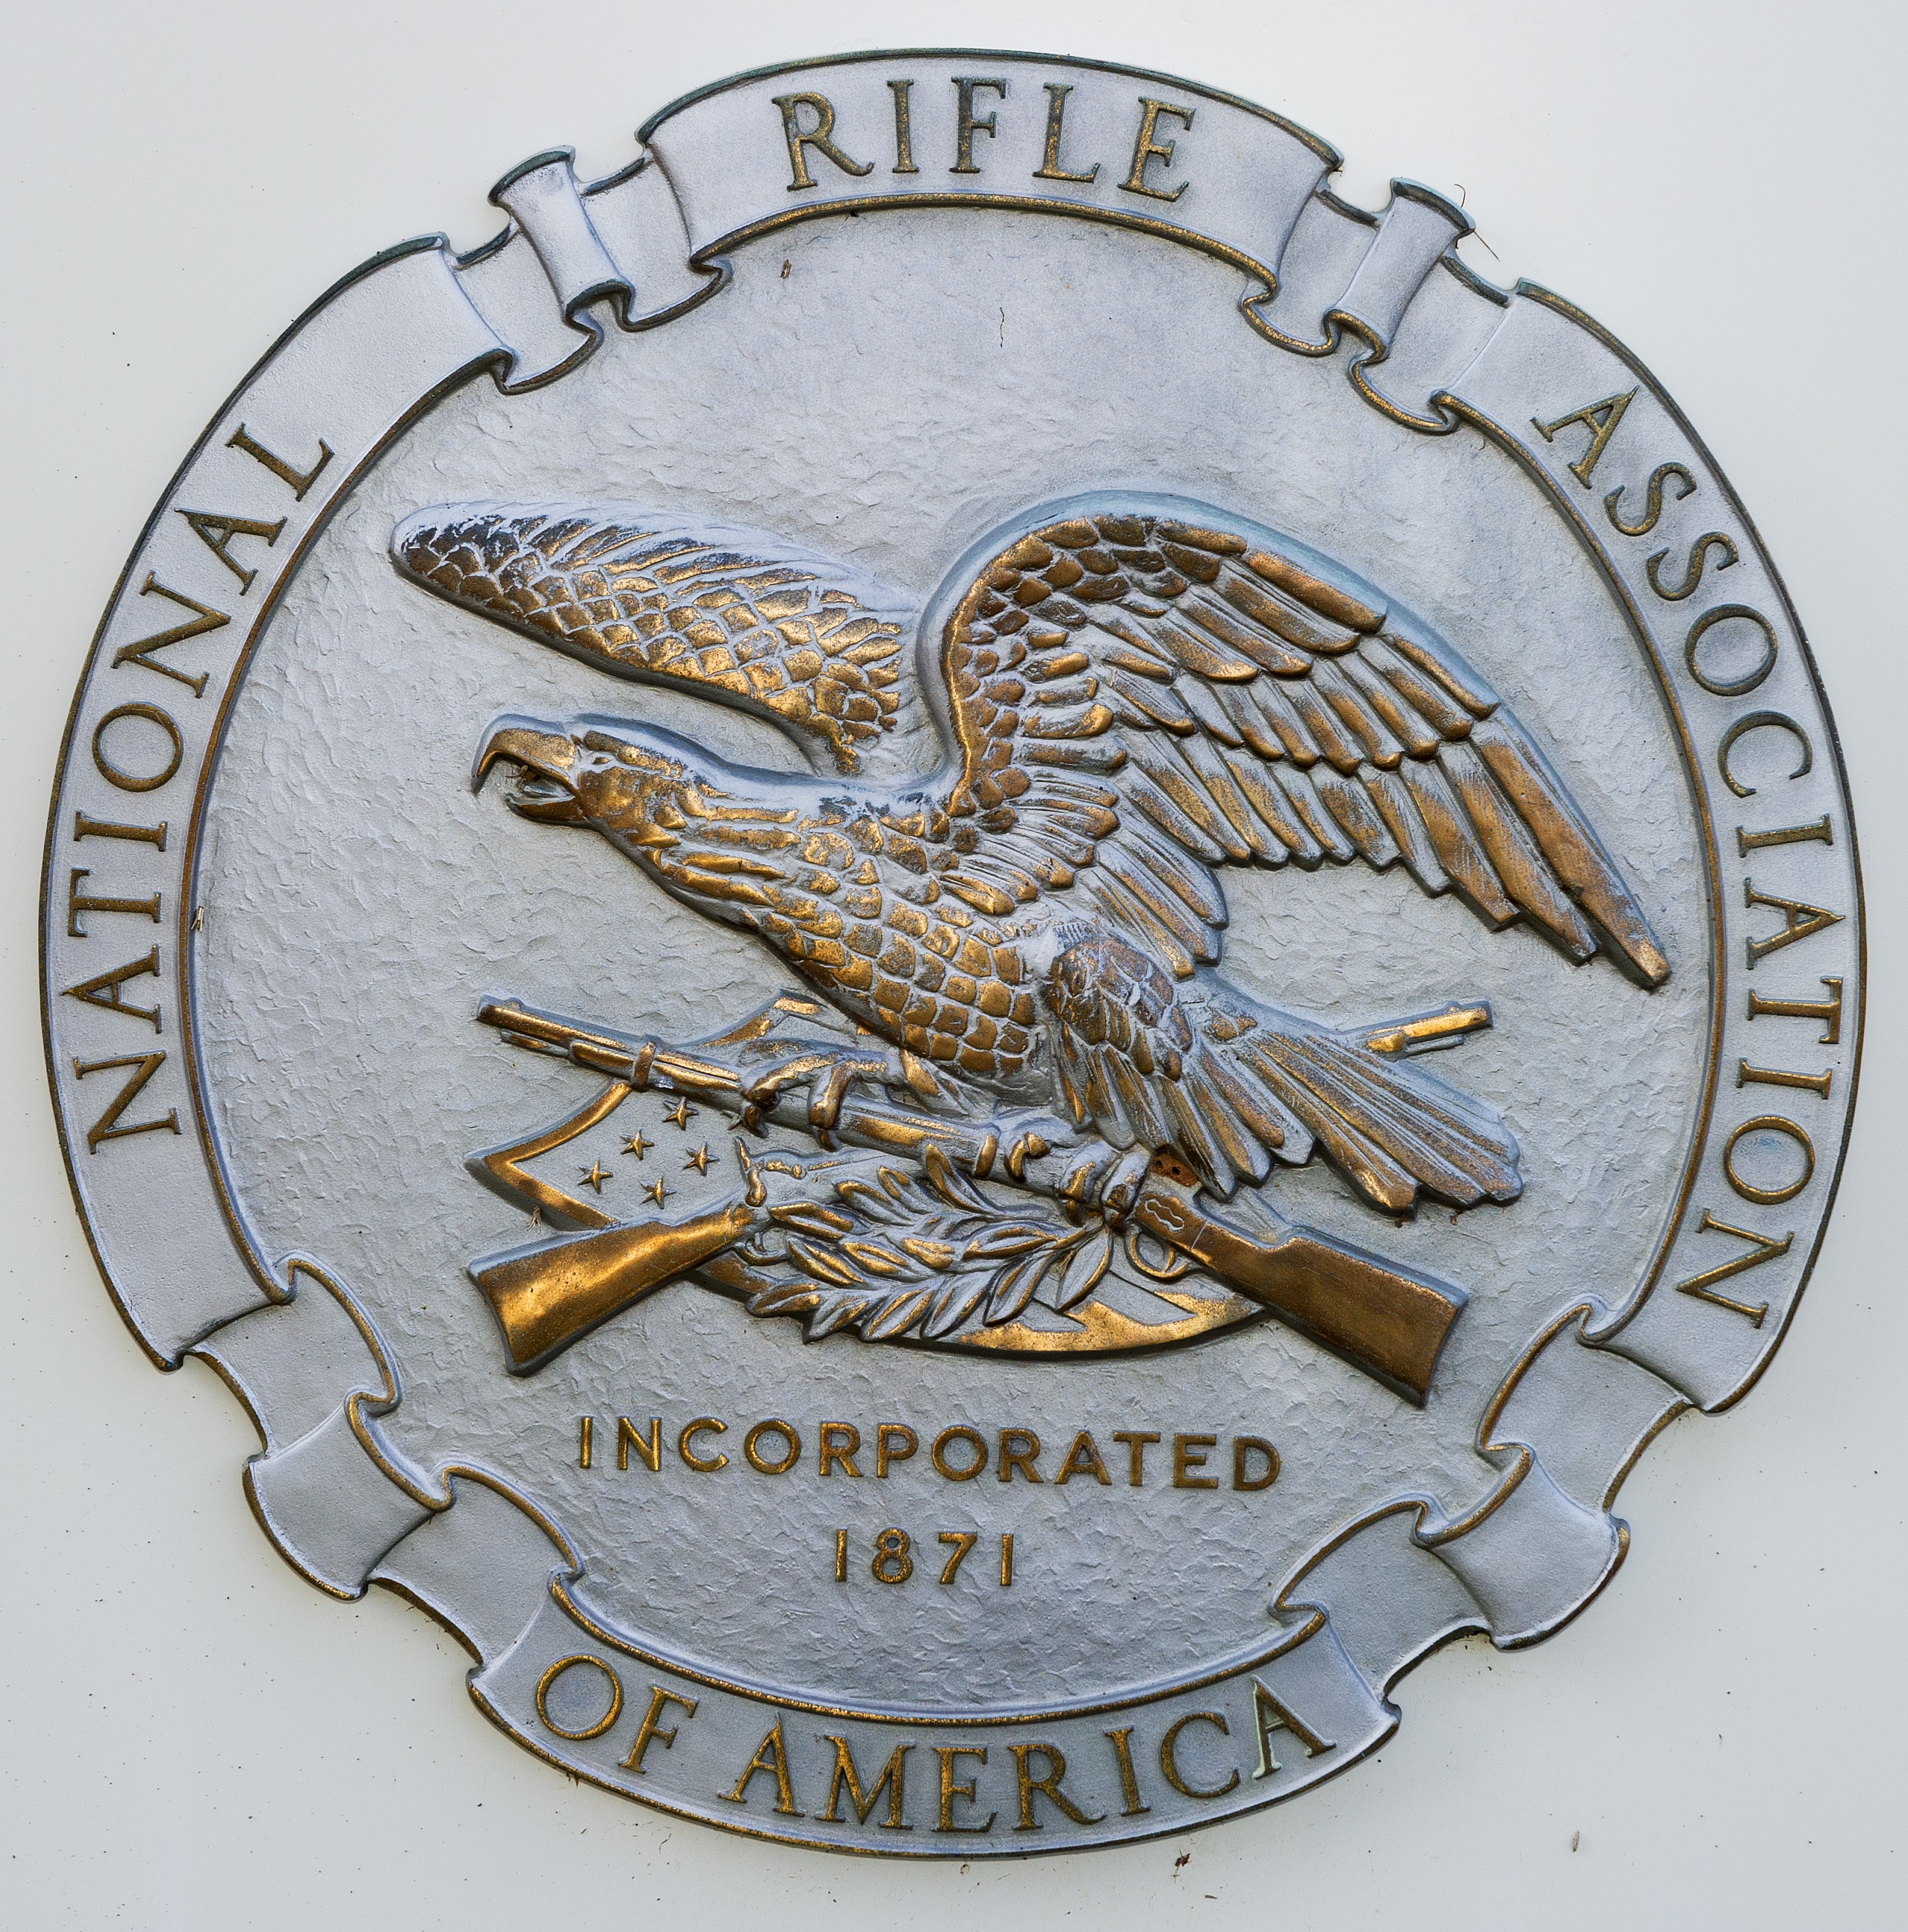 The National Rifle Association logo is seen at its headquarters in Fairfax, Va., on March 14, 2013. (Paul Richards—Getty Images)